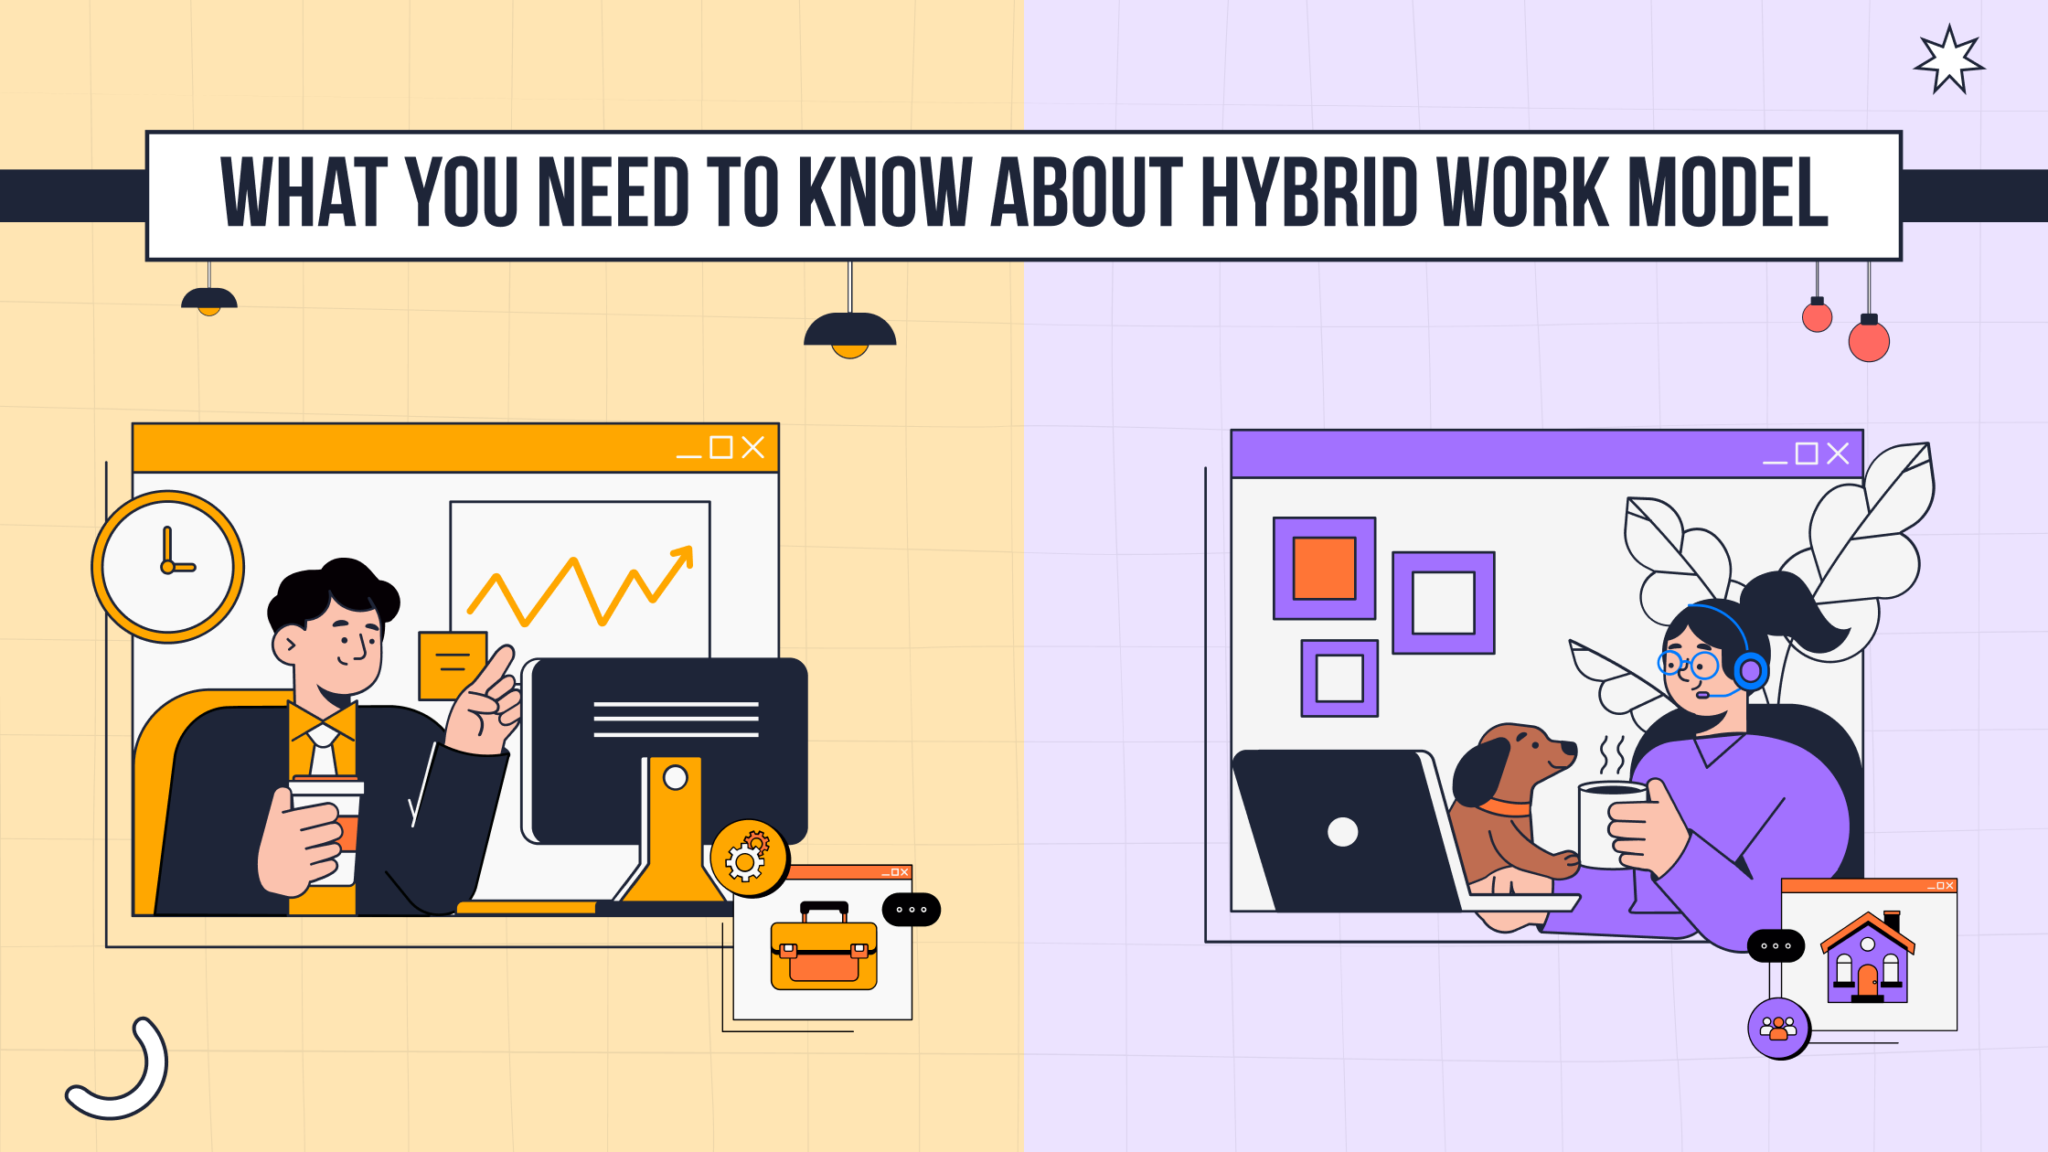 literature review on hybrid work model